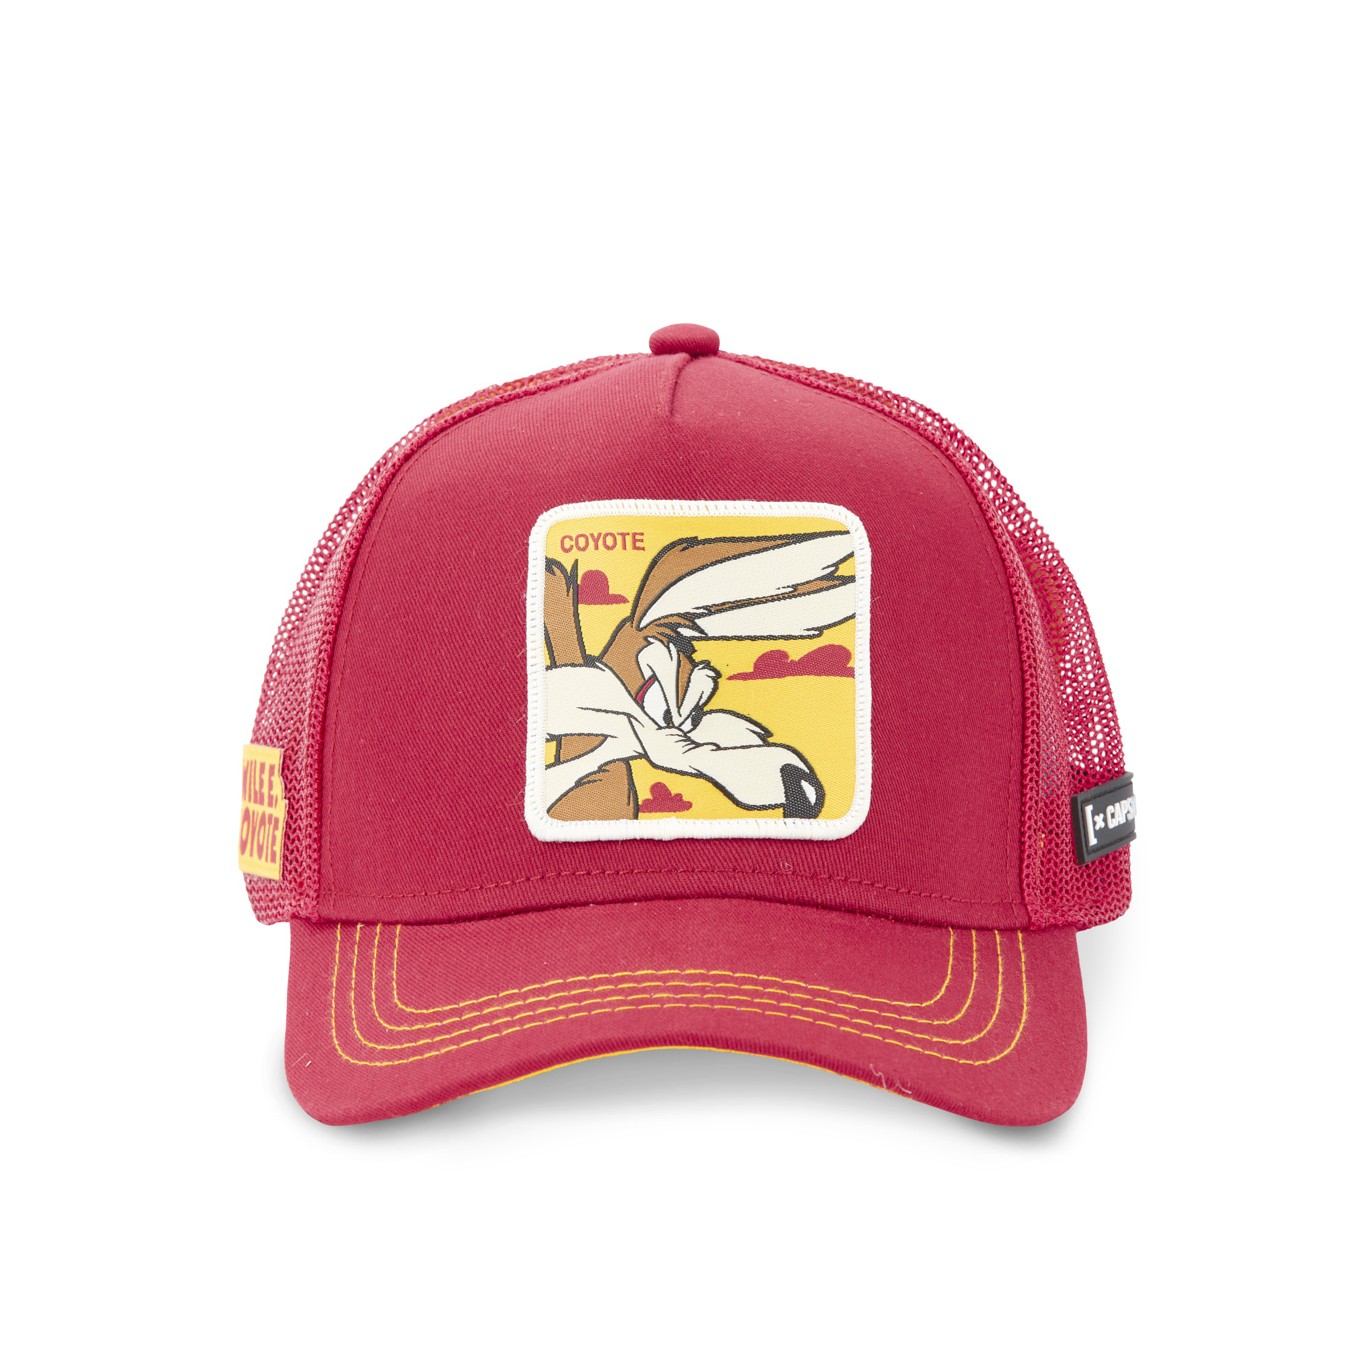 Casquette Trucker Looney Tunes Coyote Snapback Rouge Capslab Capslab - 2